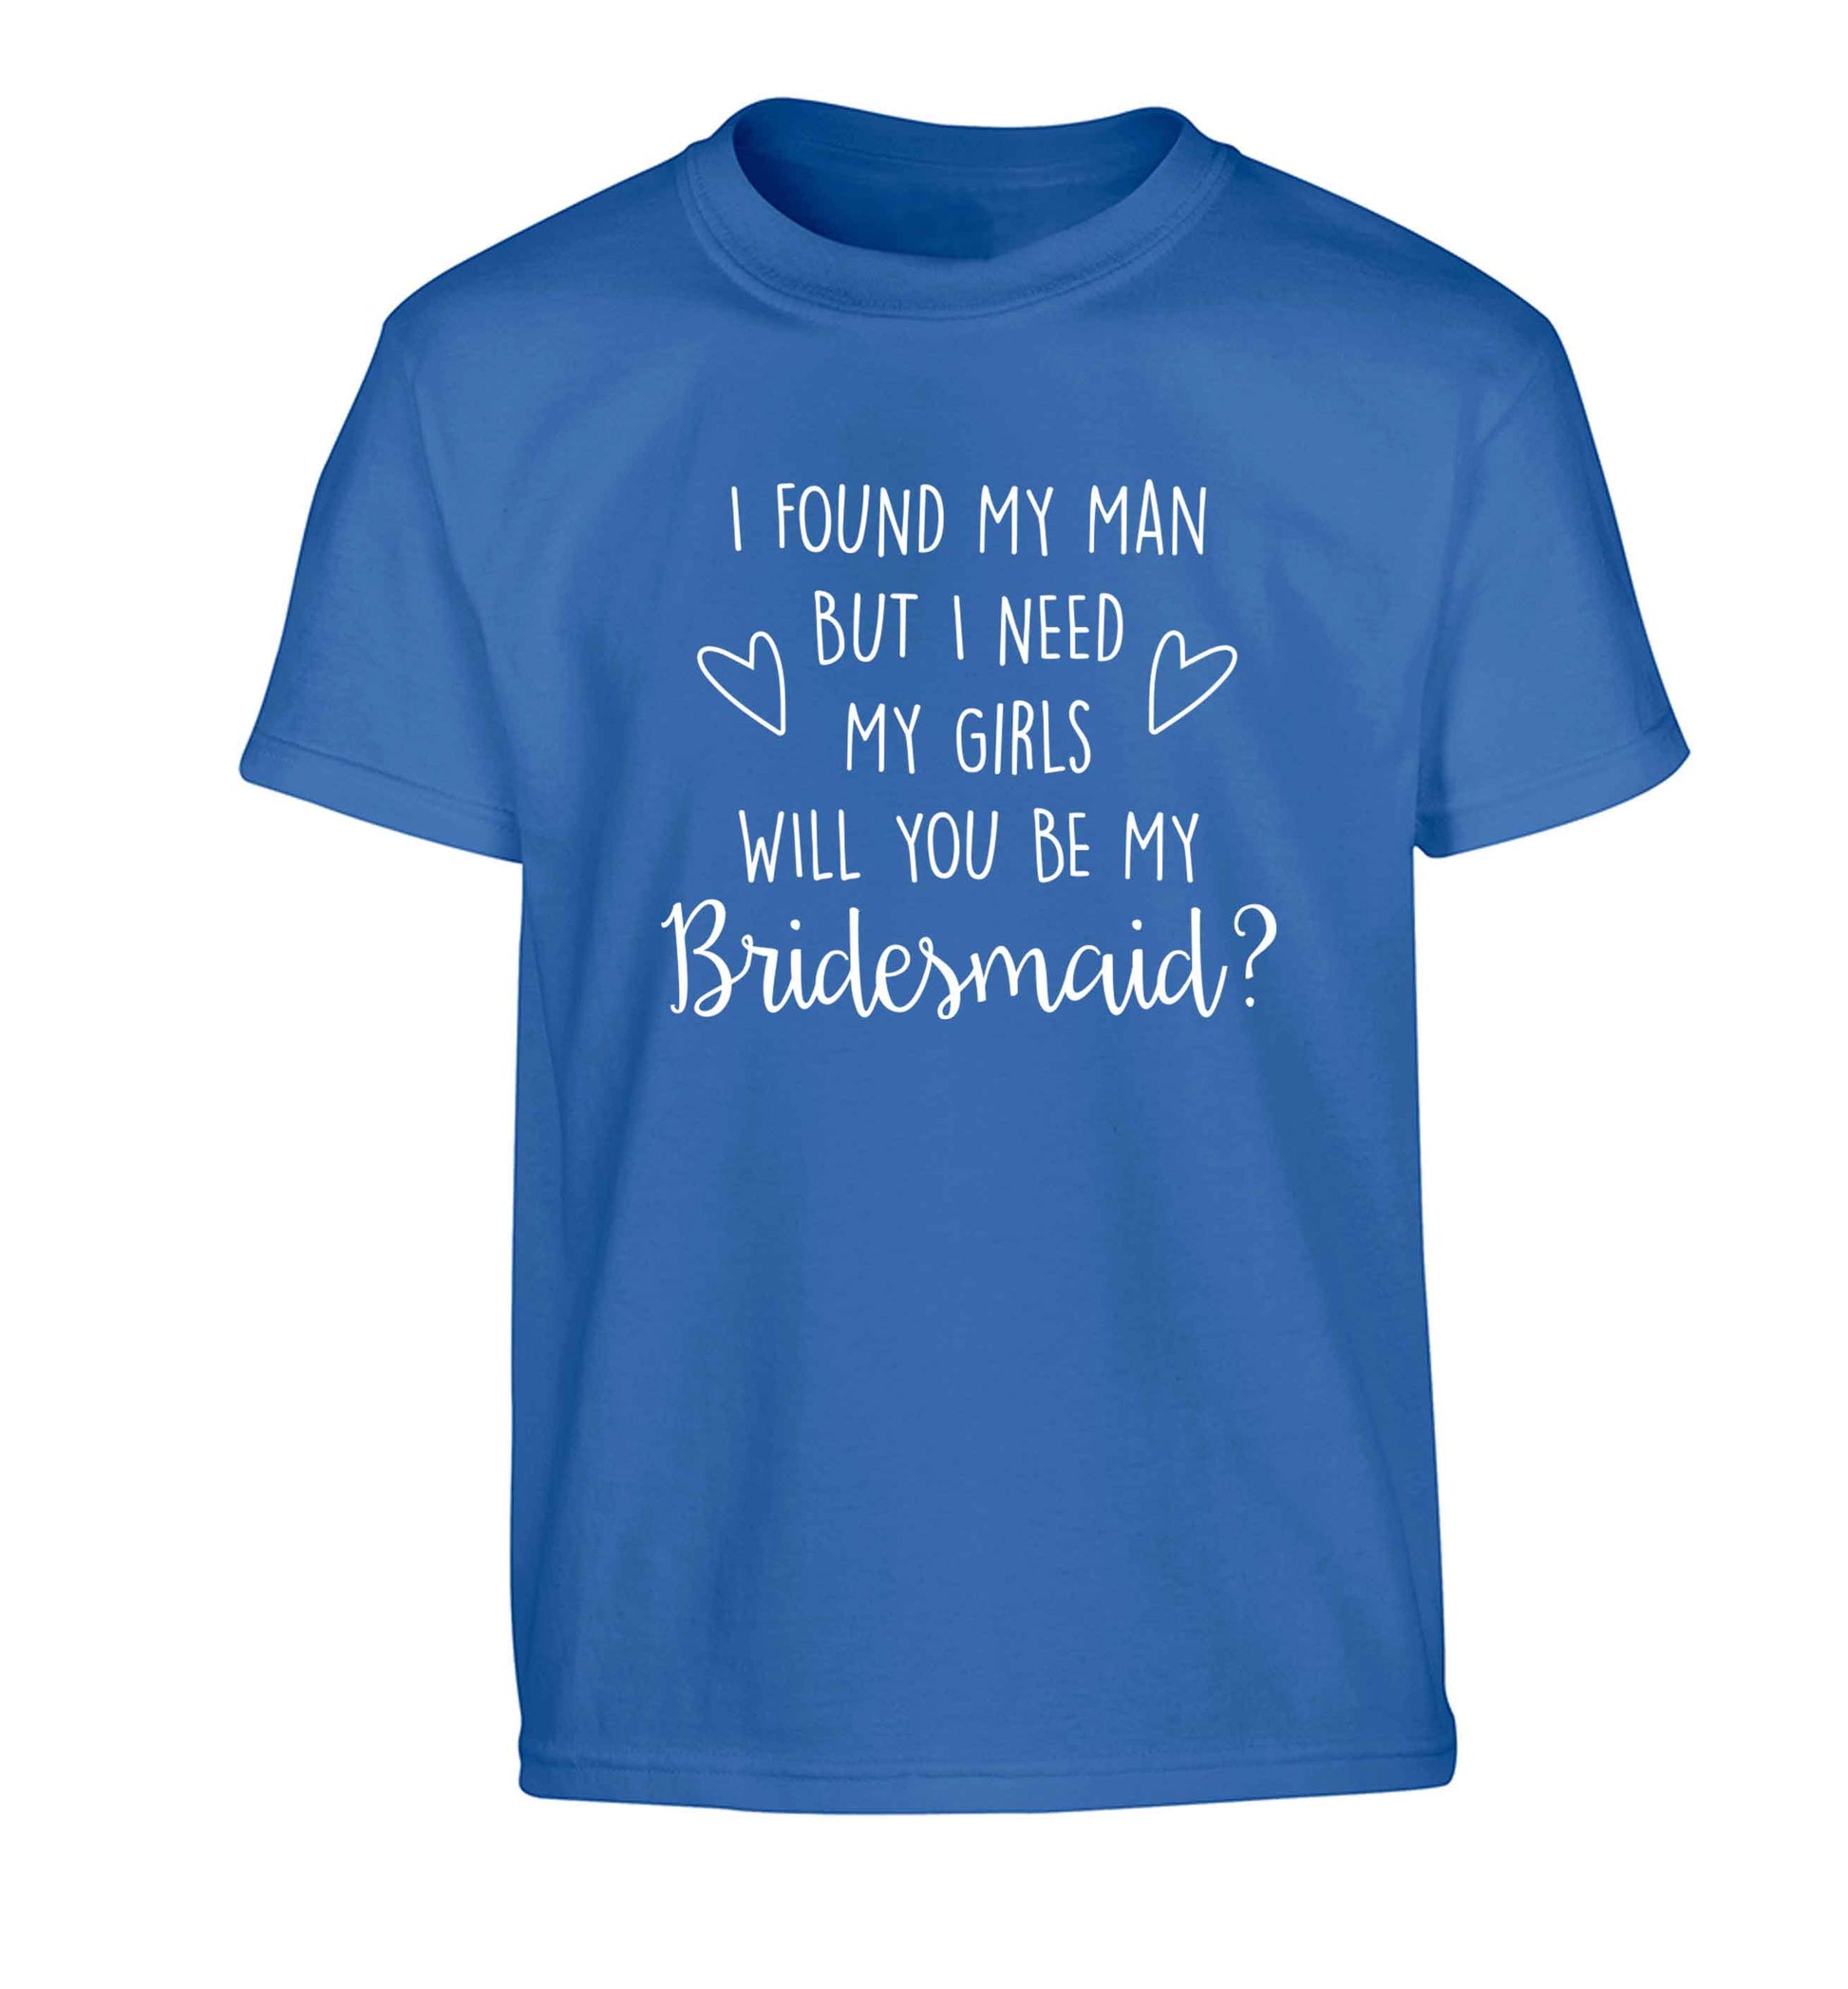 I found my man but I need my girls will you be my bridesmaid? Children's blue Tshirt 12-13 Years